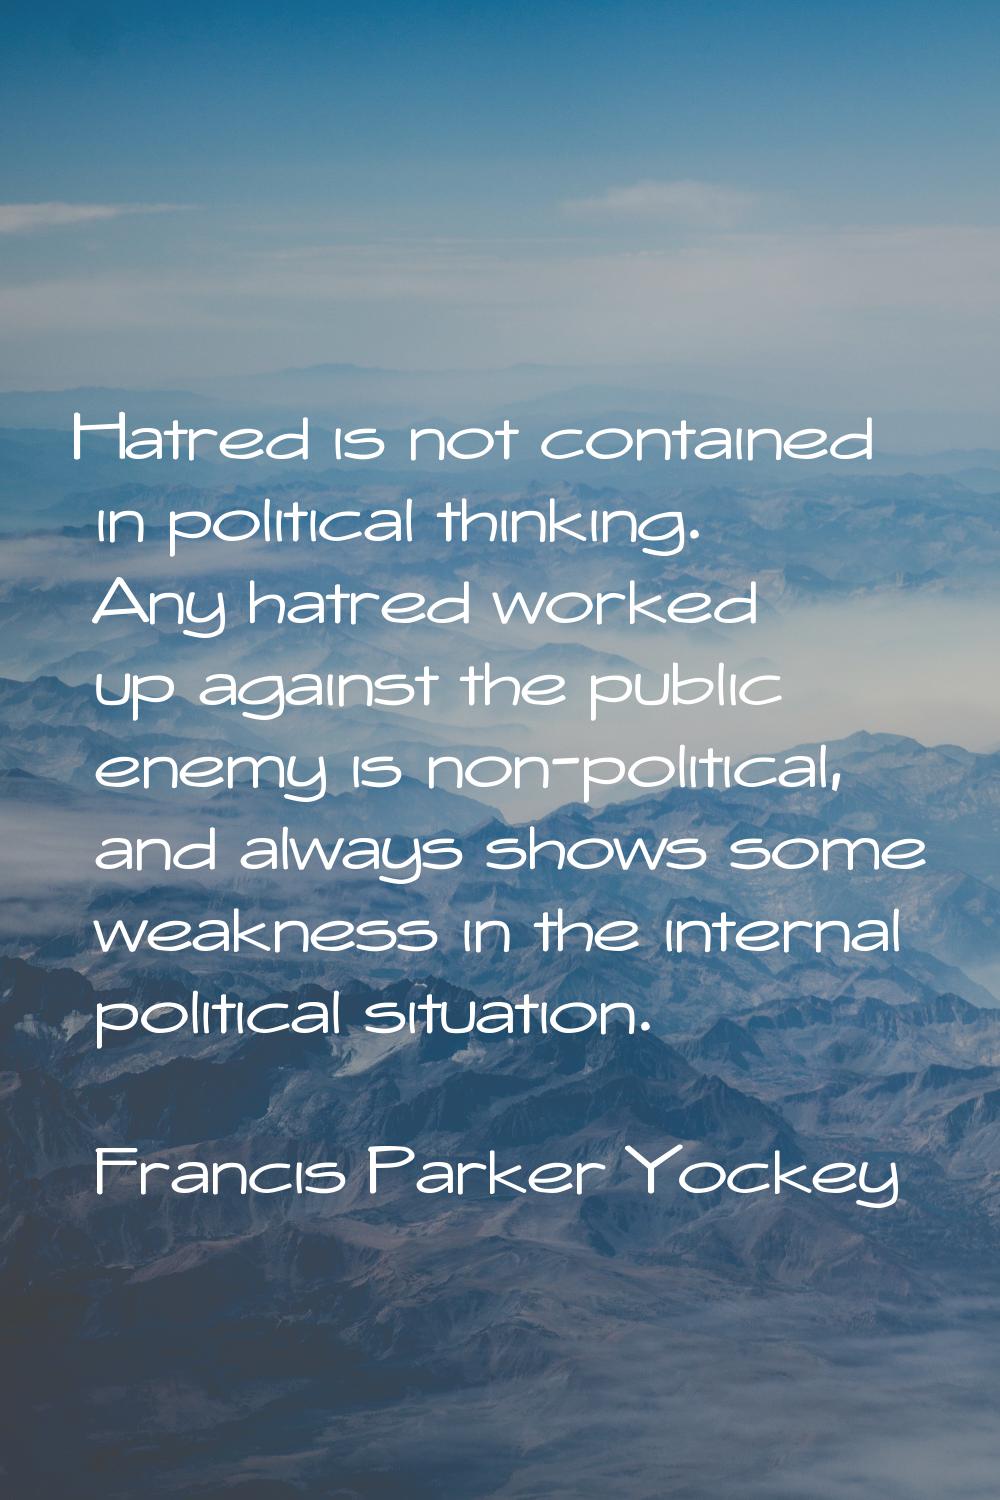 Hatred is not contained in political thinking. Any hatred worked up against the public enemy is non